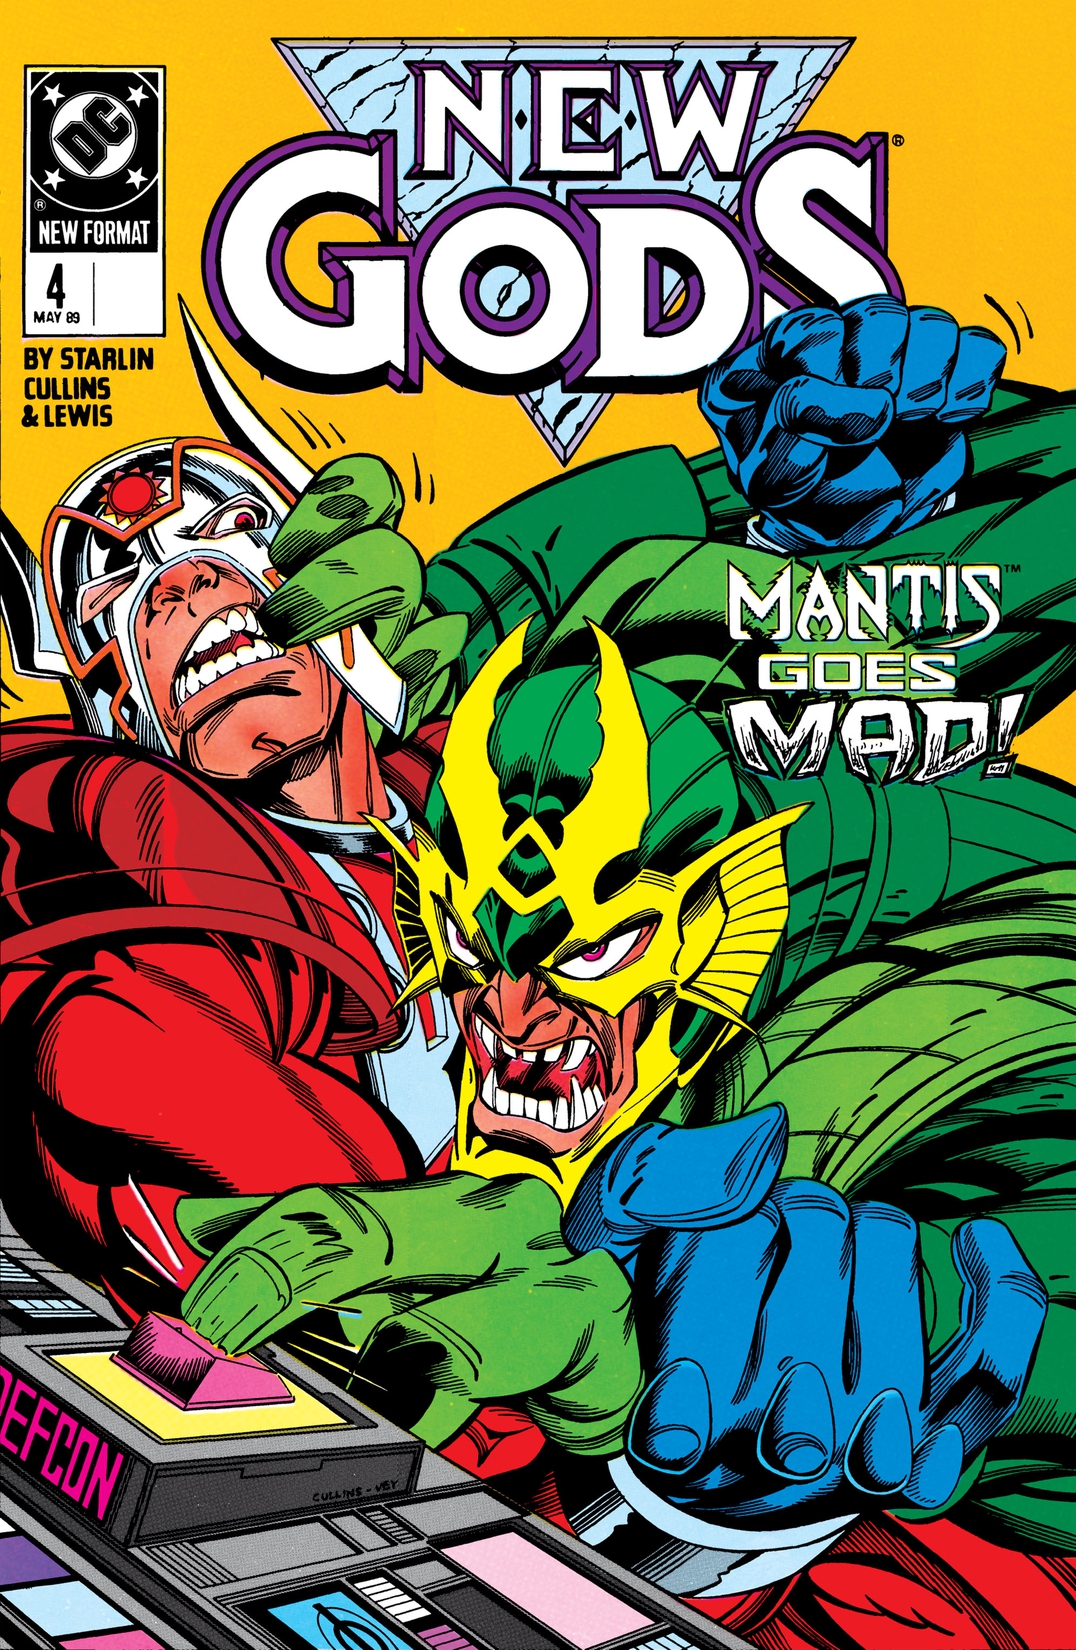 New Gods (1989-) #4 preview images